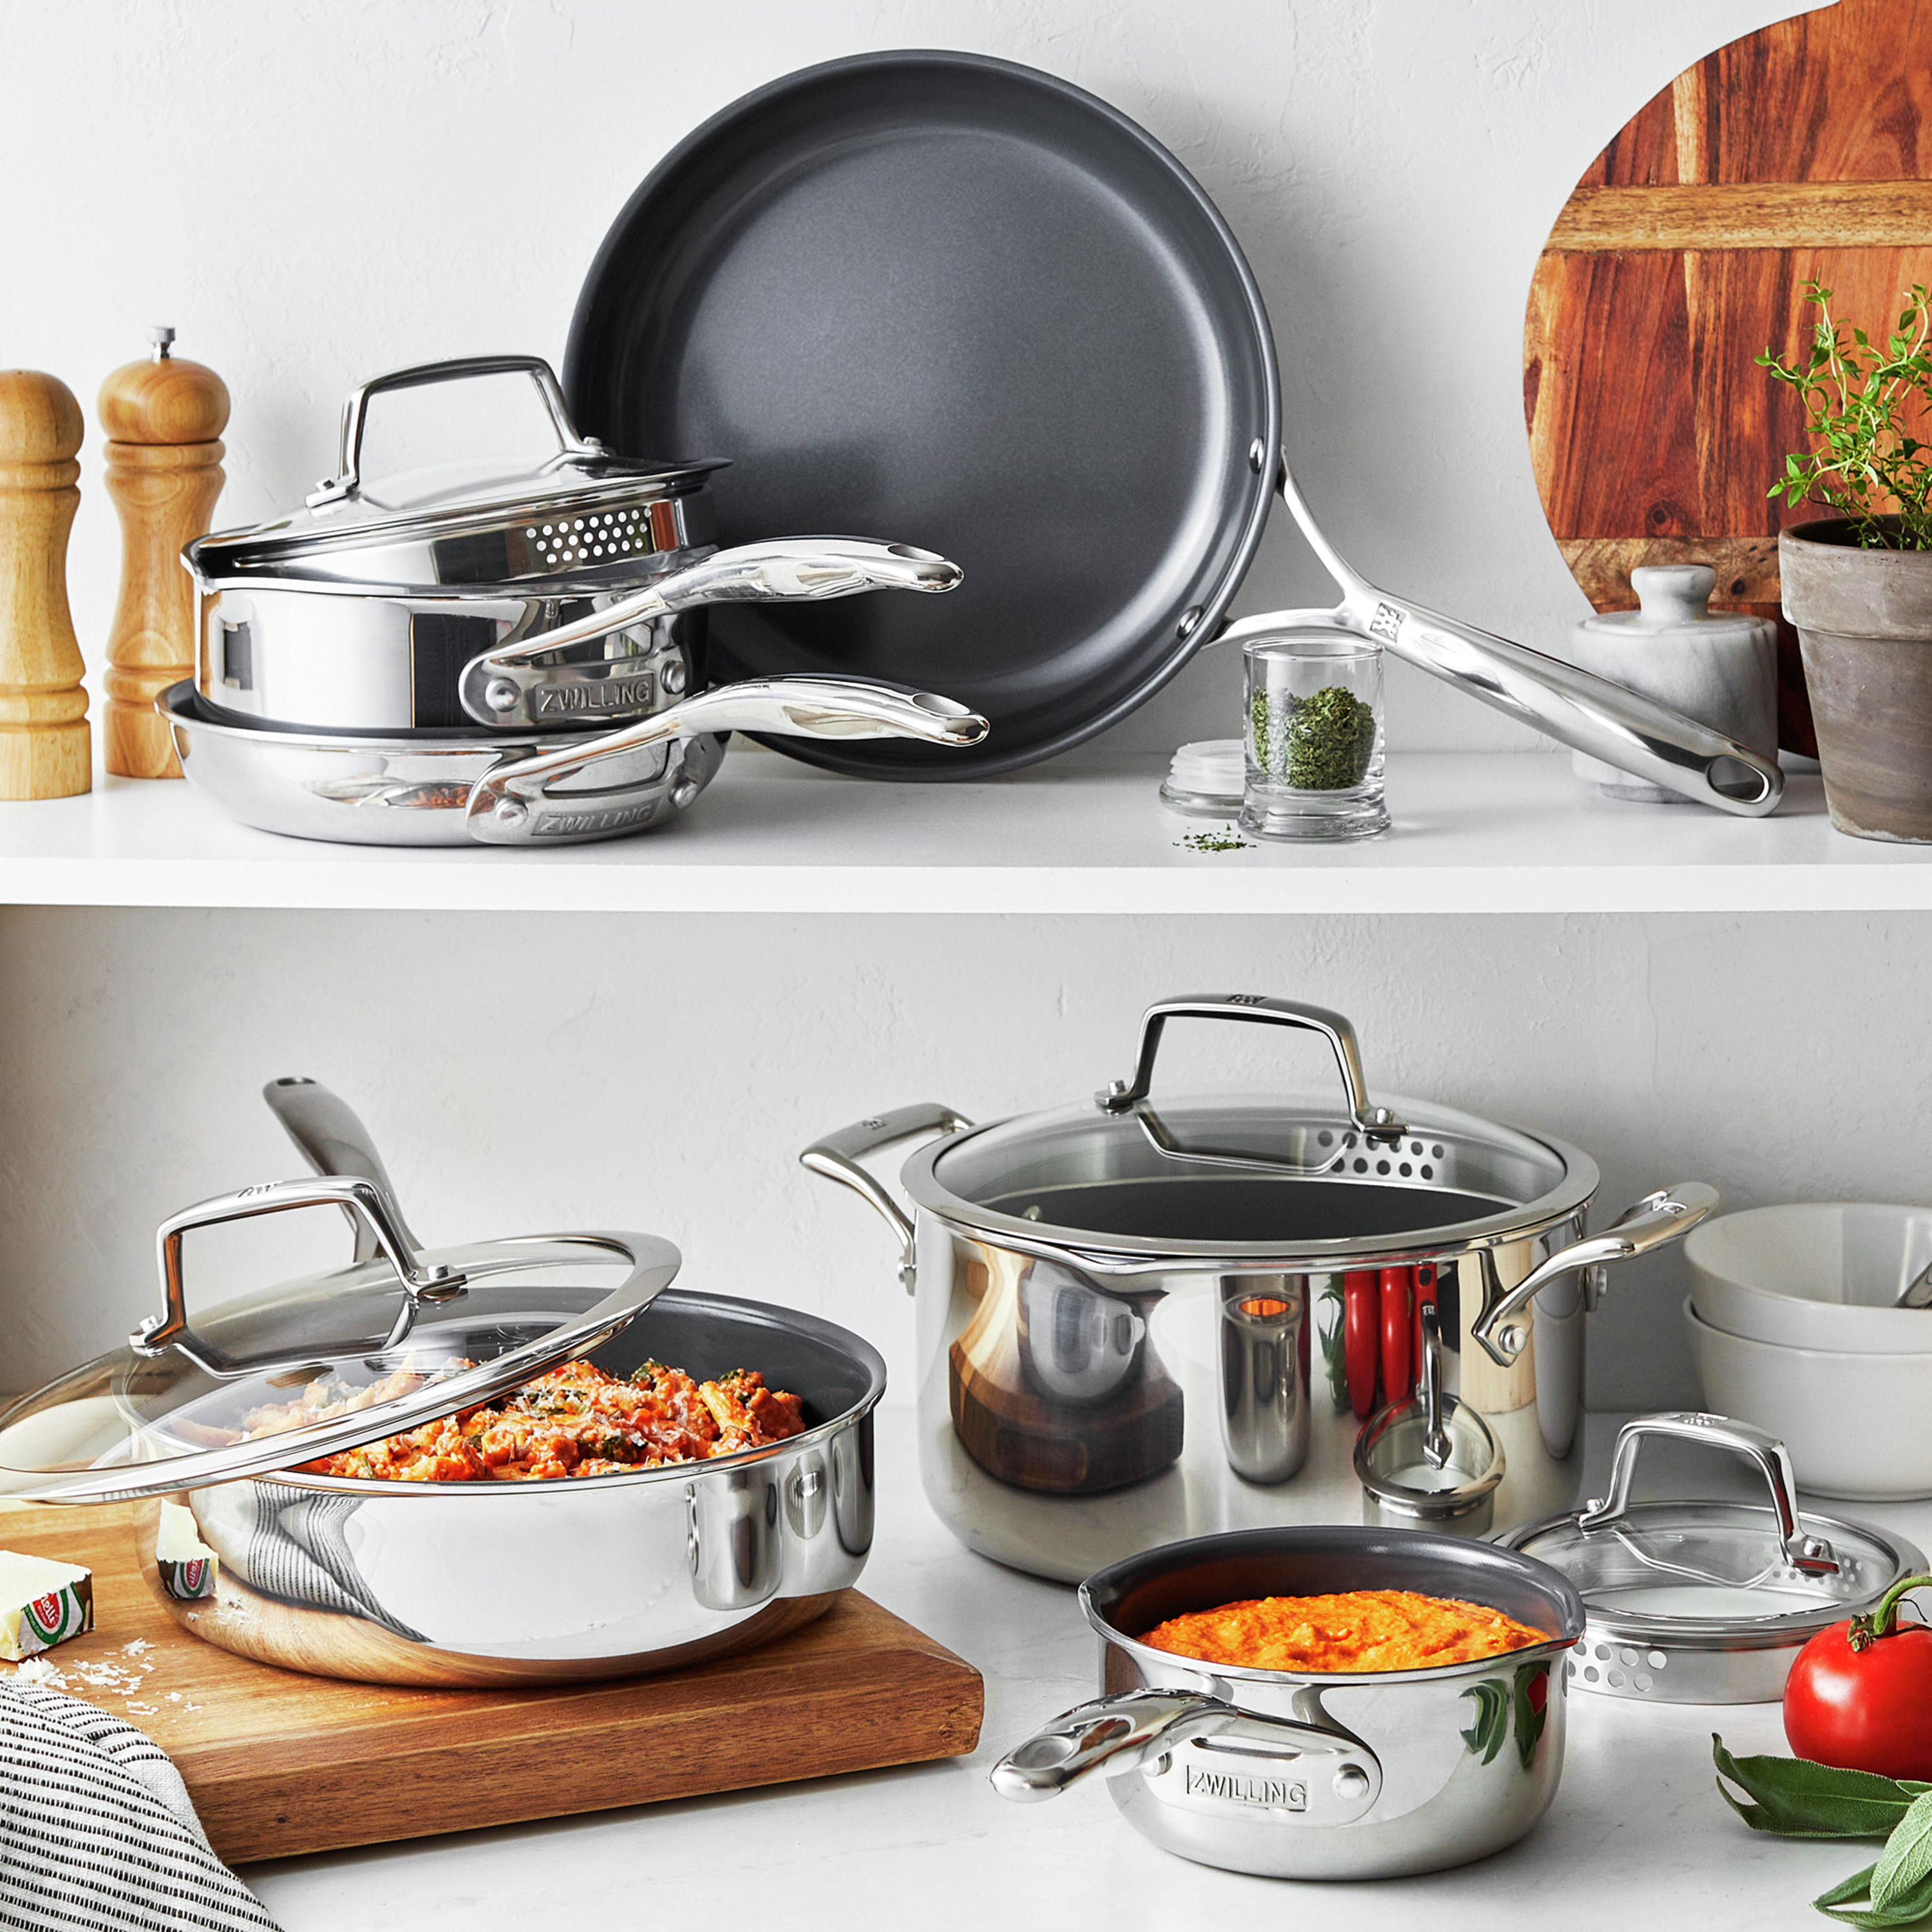 ZWILLING Clad CFX 7-pc, Non-stick, Stainless Steel Ceramic Cookware Set